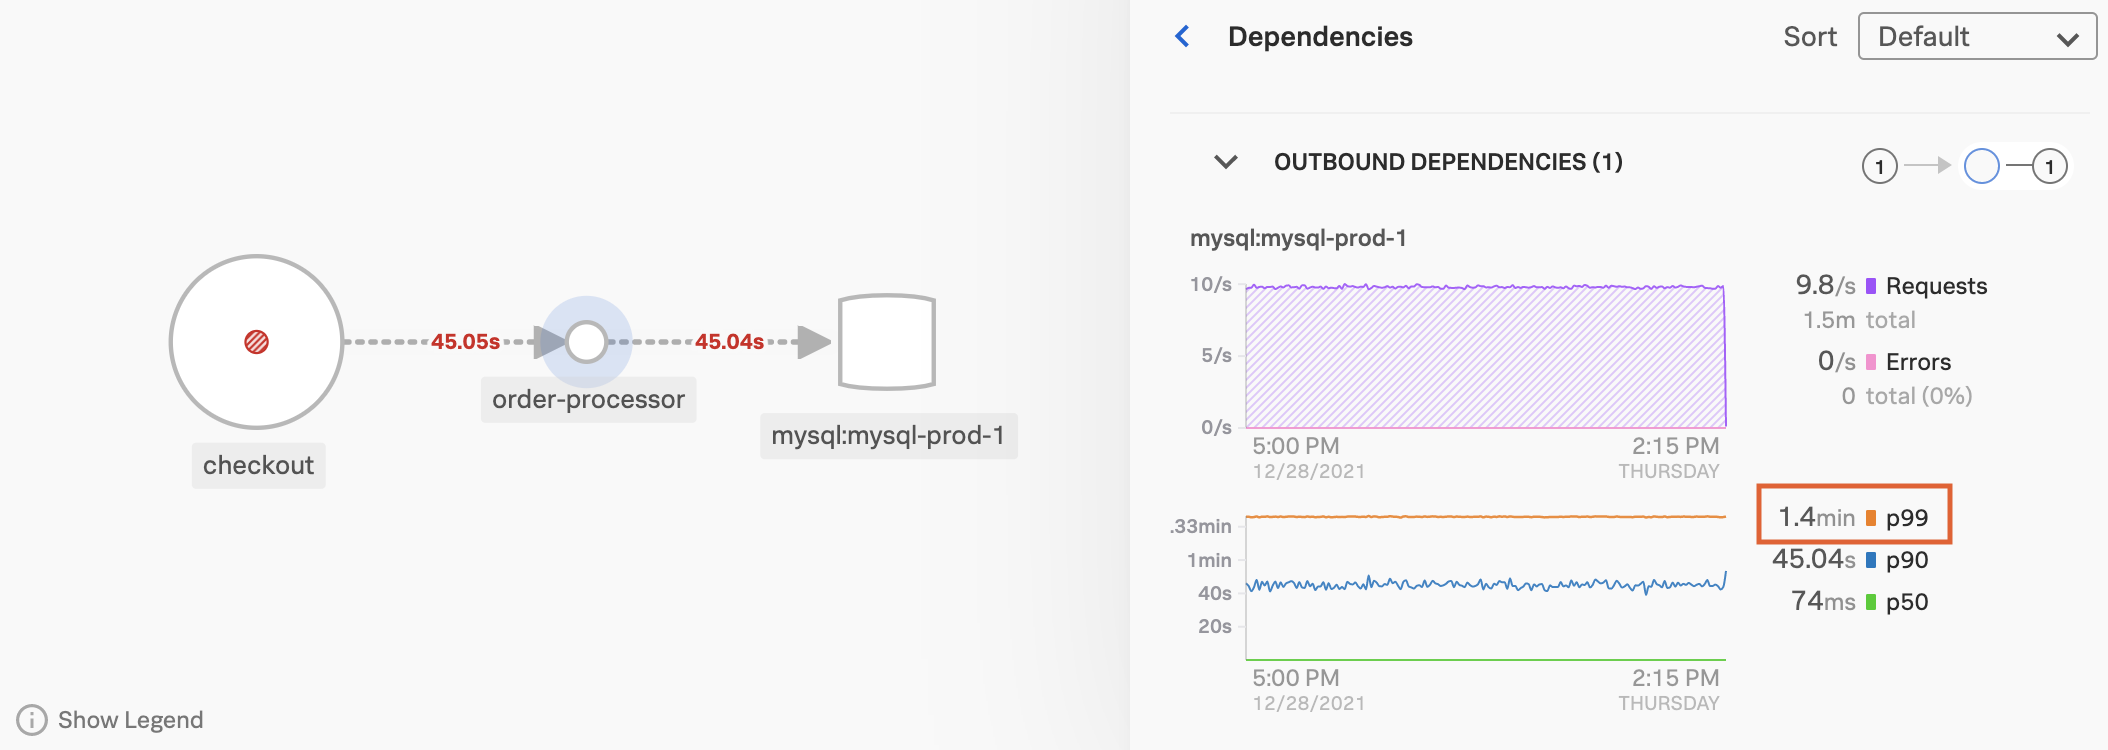 This screenshot shows a closeup of the ``order-processor`` service and its dependencies in the service map. The Dependencies panel shows that the high latency is coming from the ``mysql:mysql-prod-1`` database.